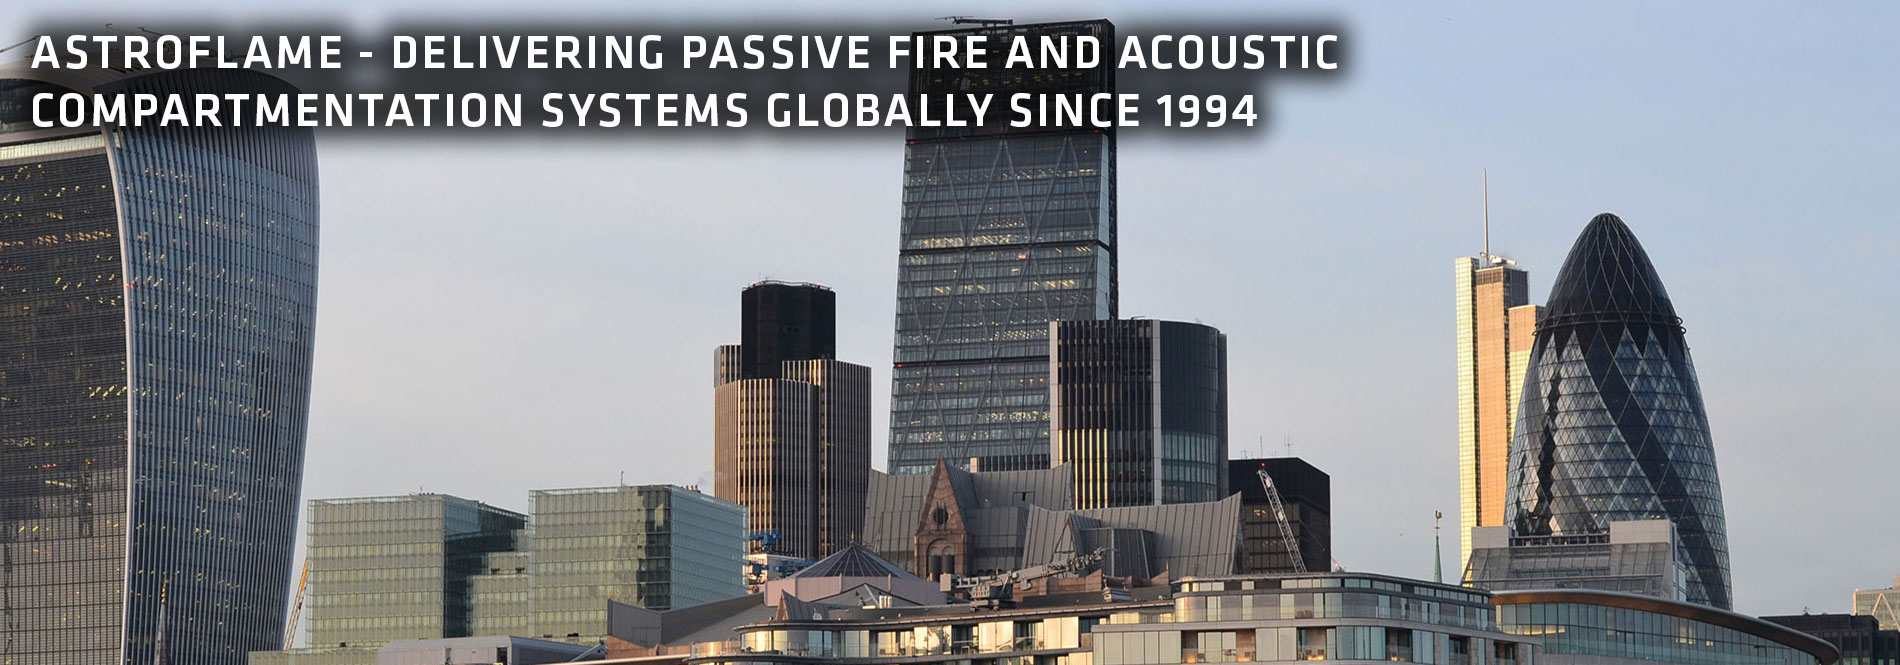 Astroflame Delivering passive fire and acoustic compartmentation systems